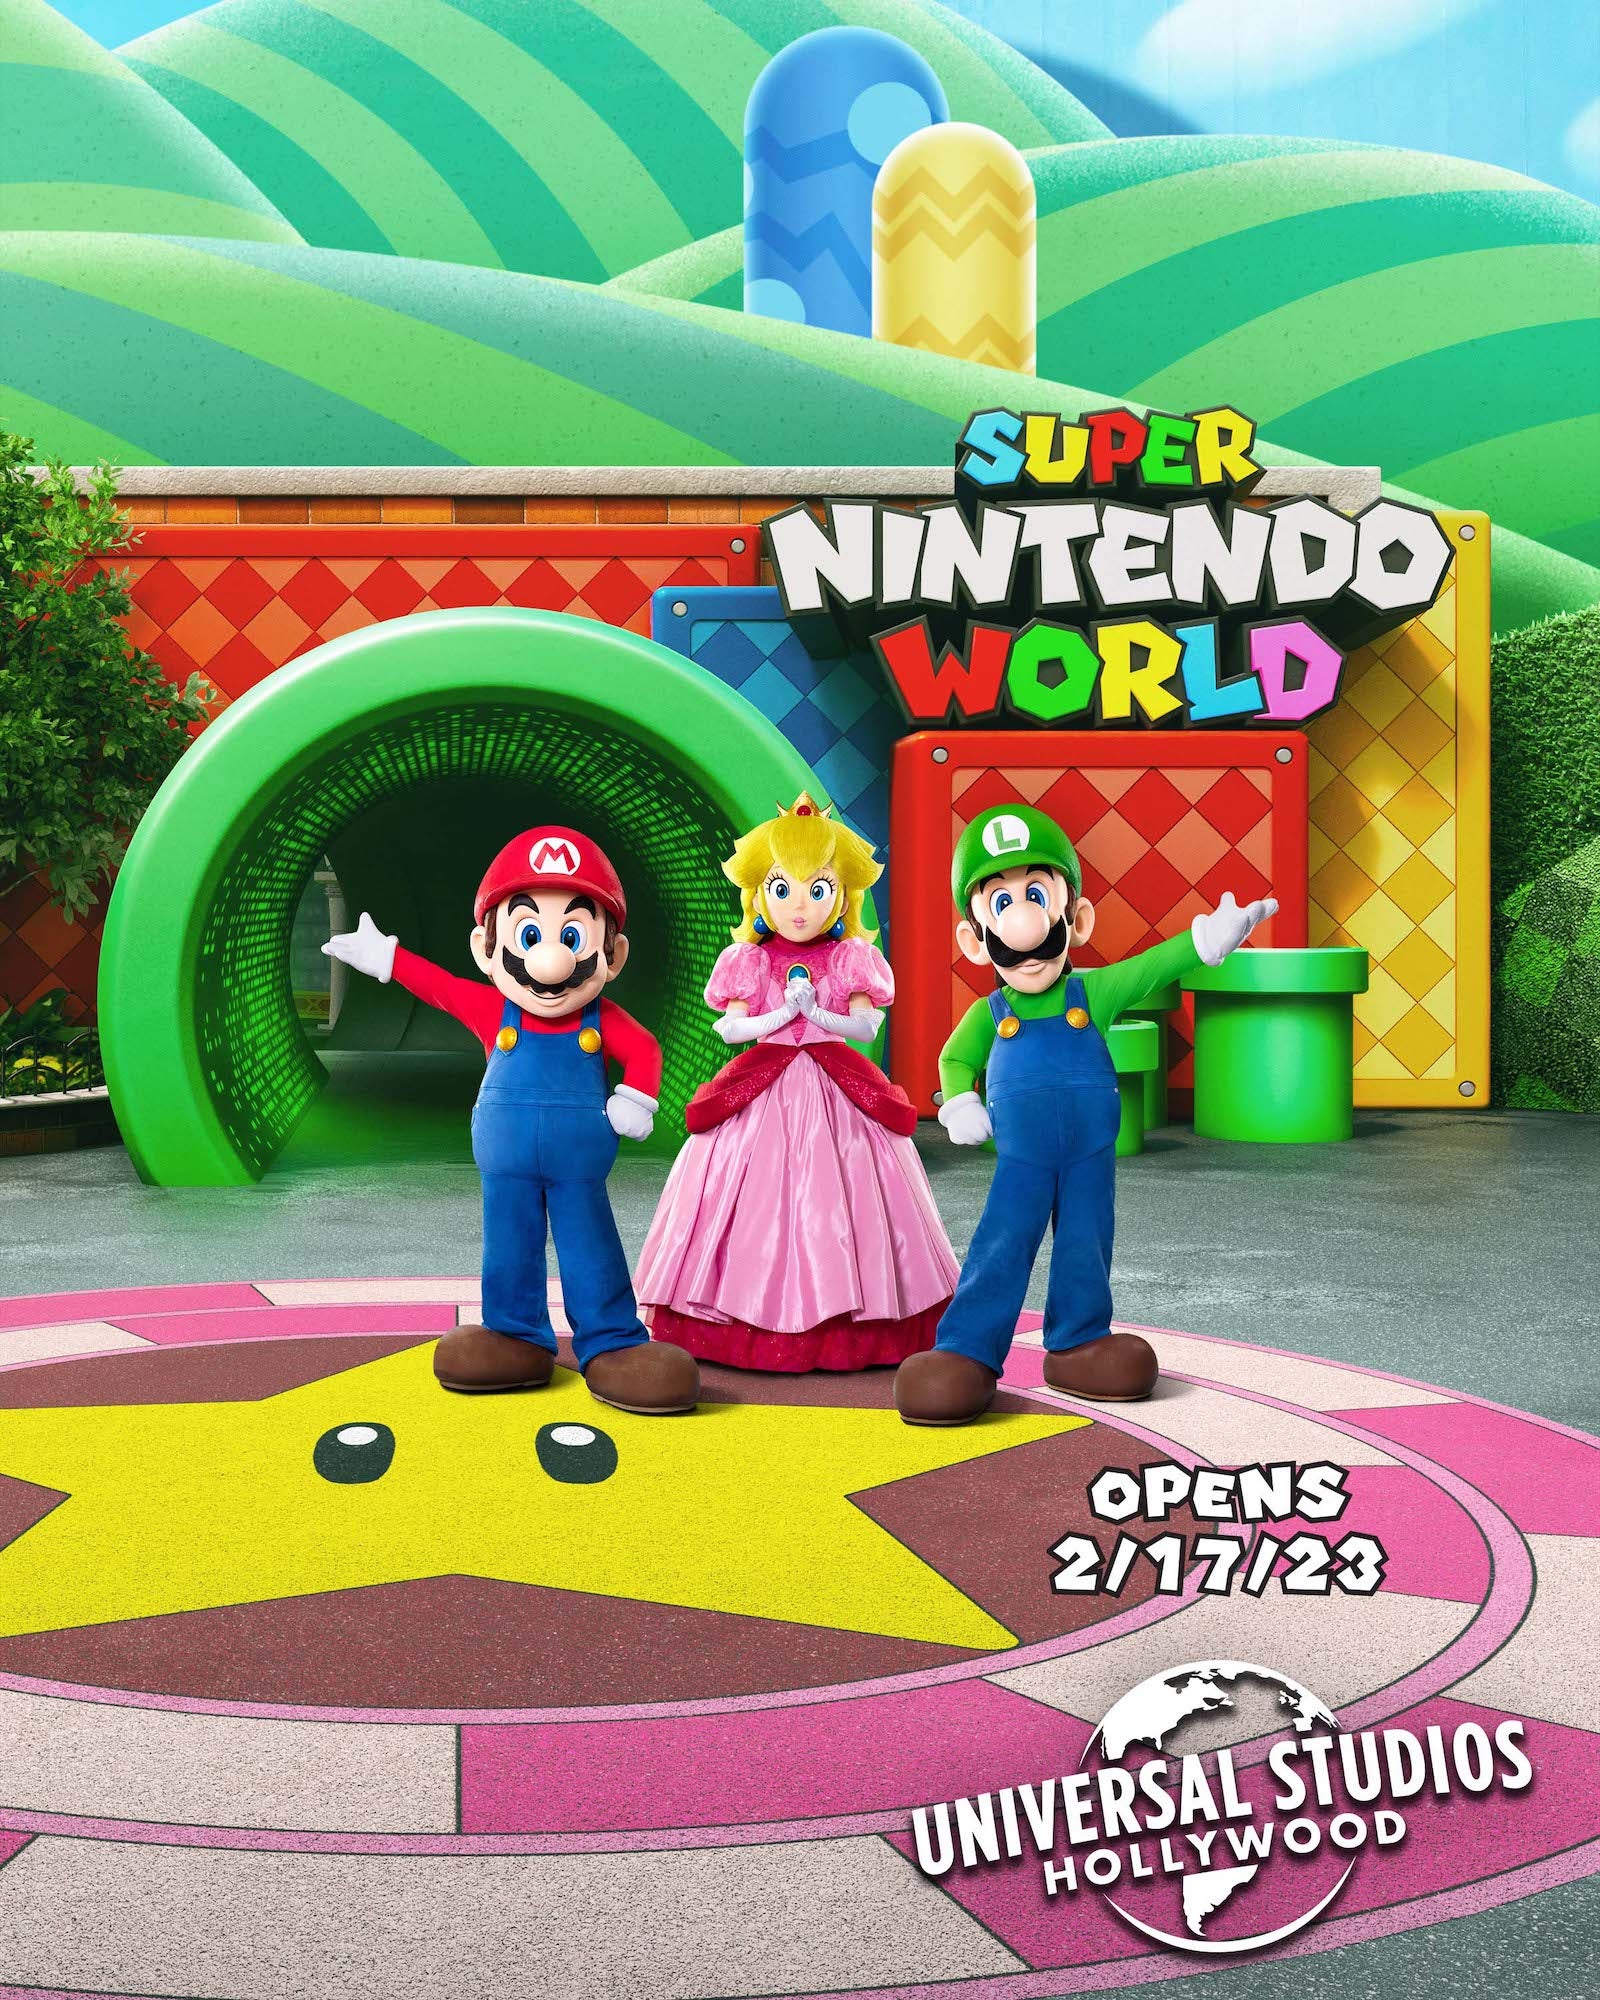 You are currently viewing Super Nintendo World set to open in February 2023 at Universal Studios Hollywood